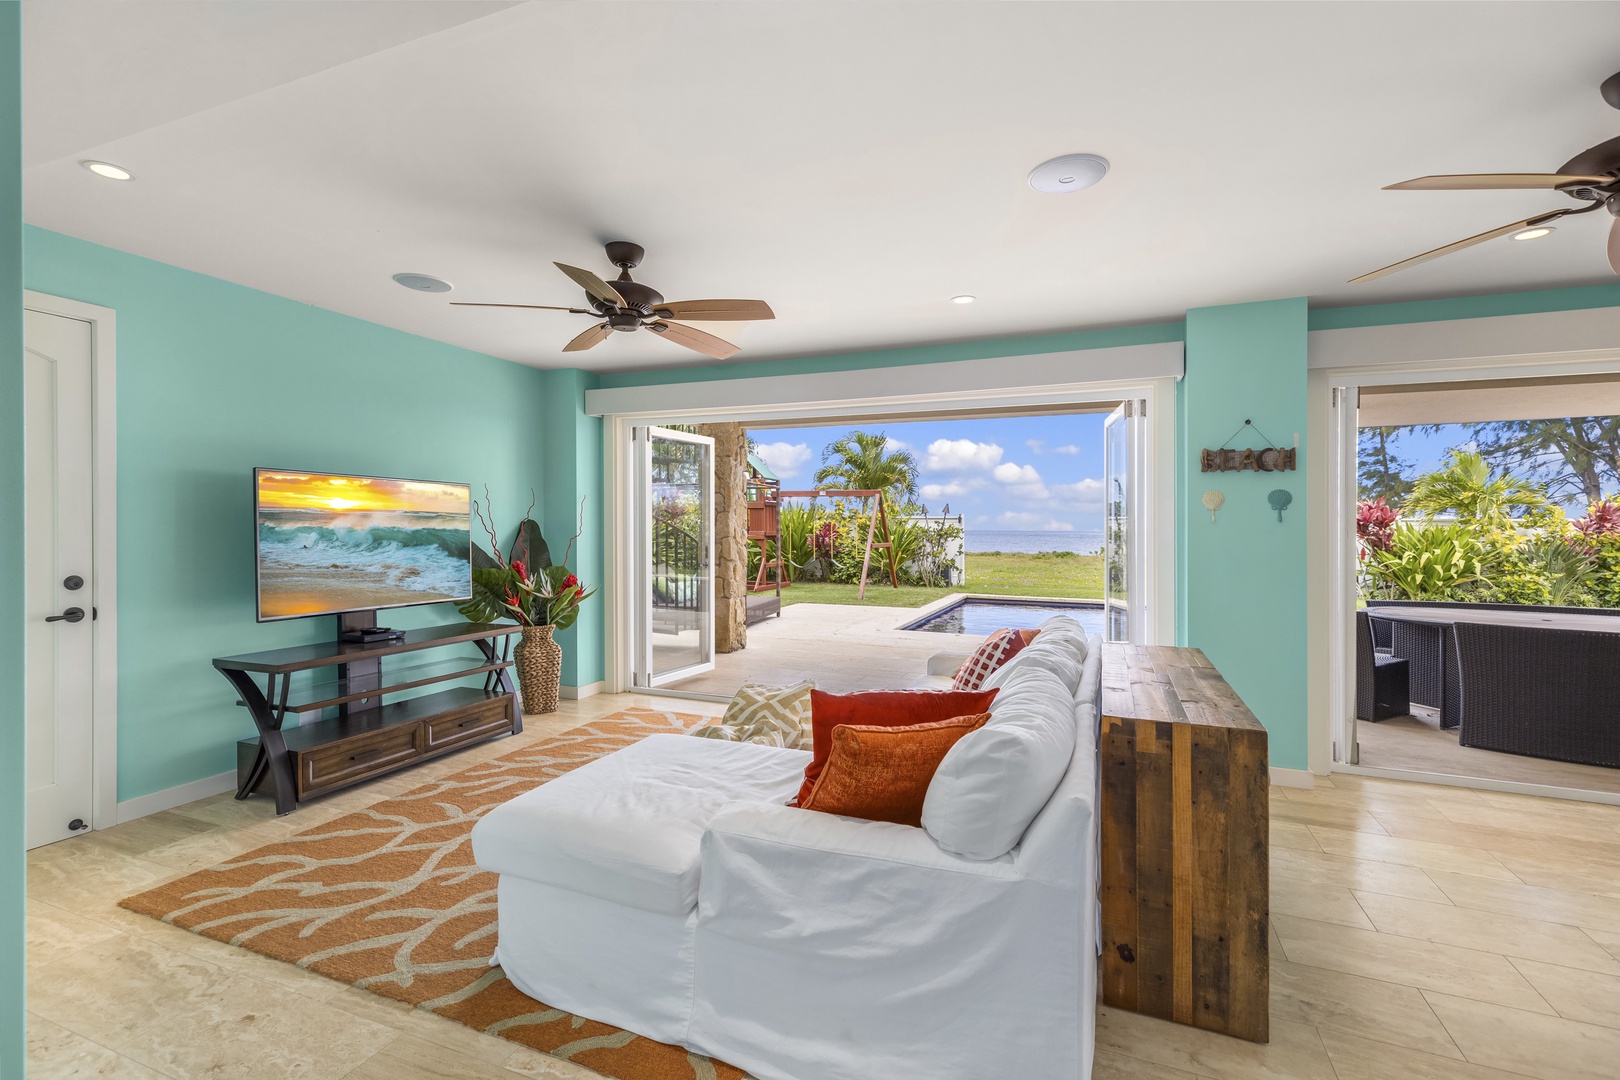 Waialua Vacation Rentals, Kala'iku* - Another large television in the first-floor media area.